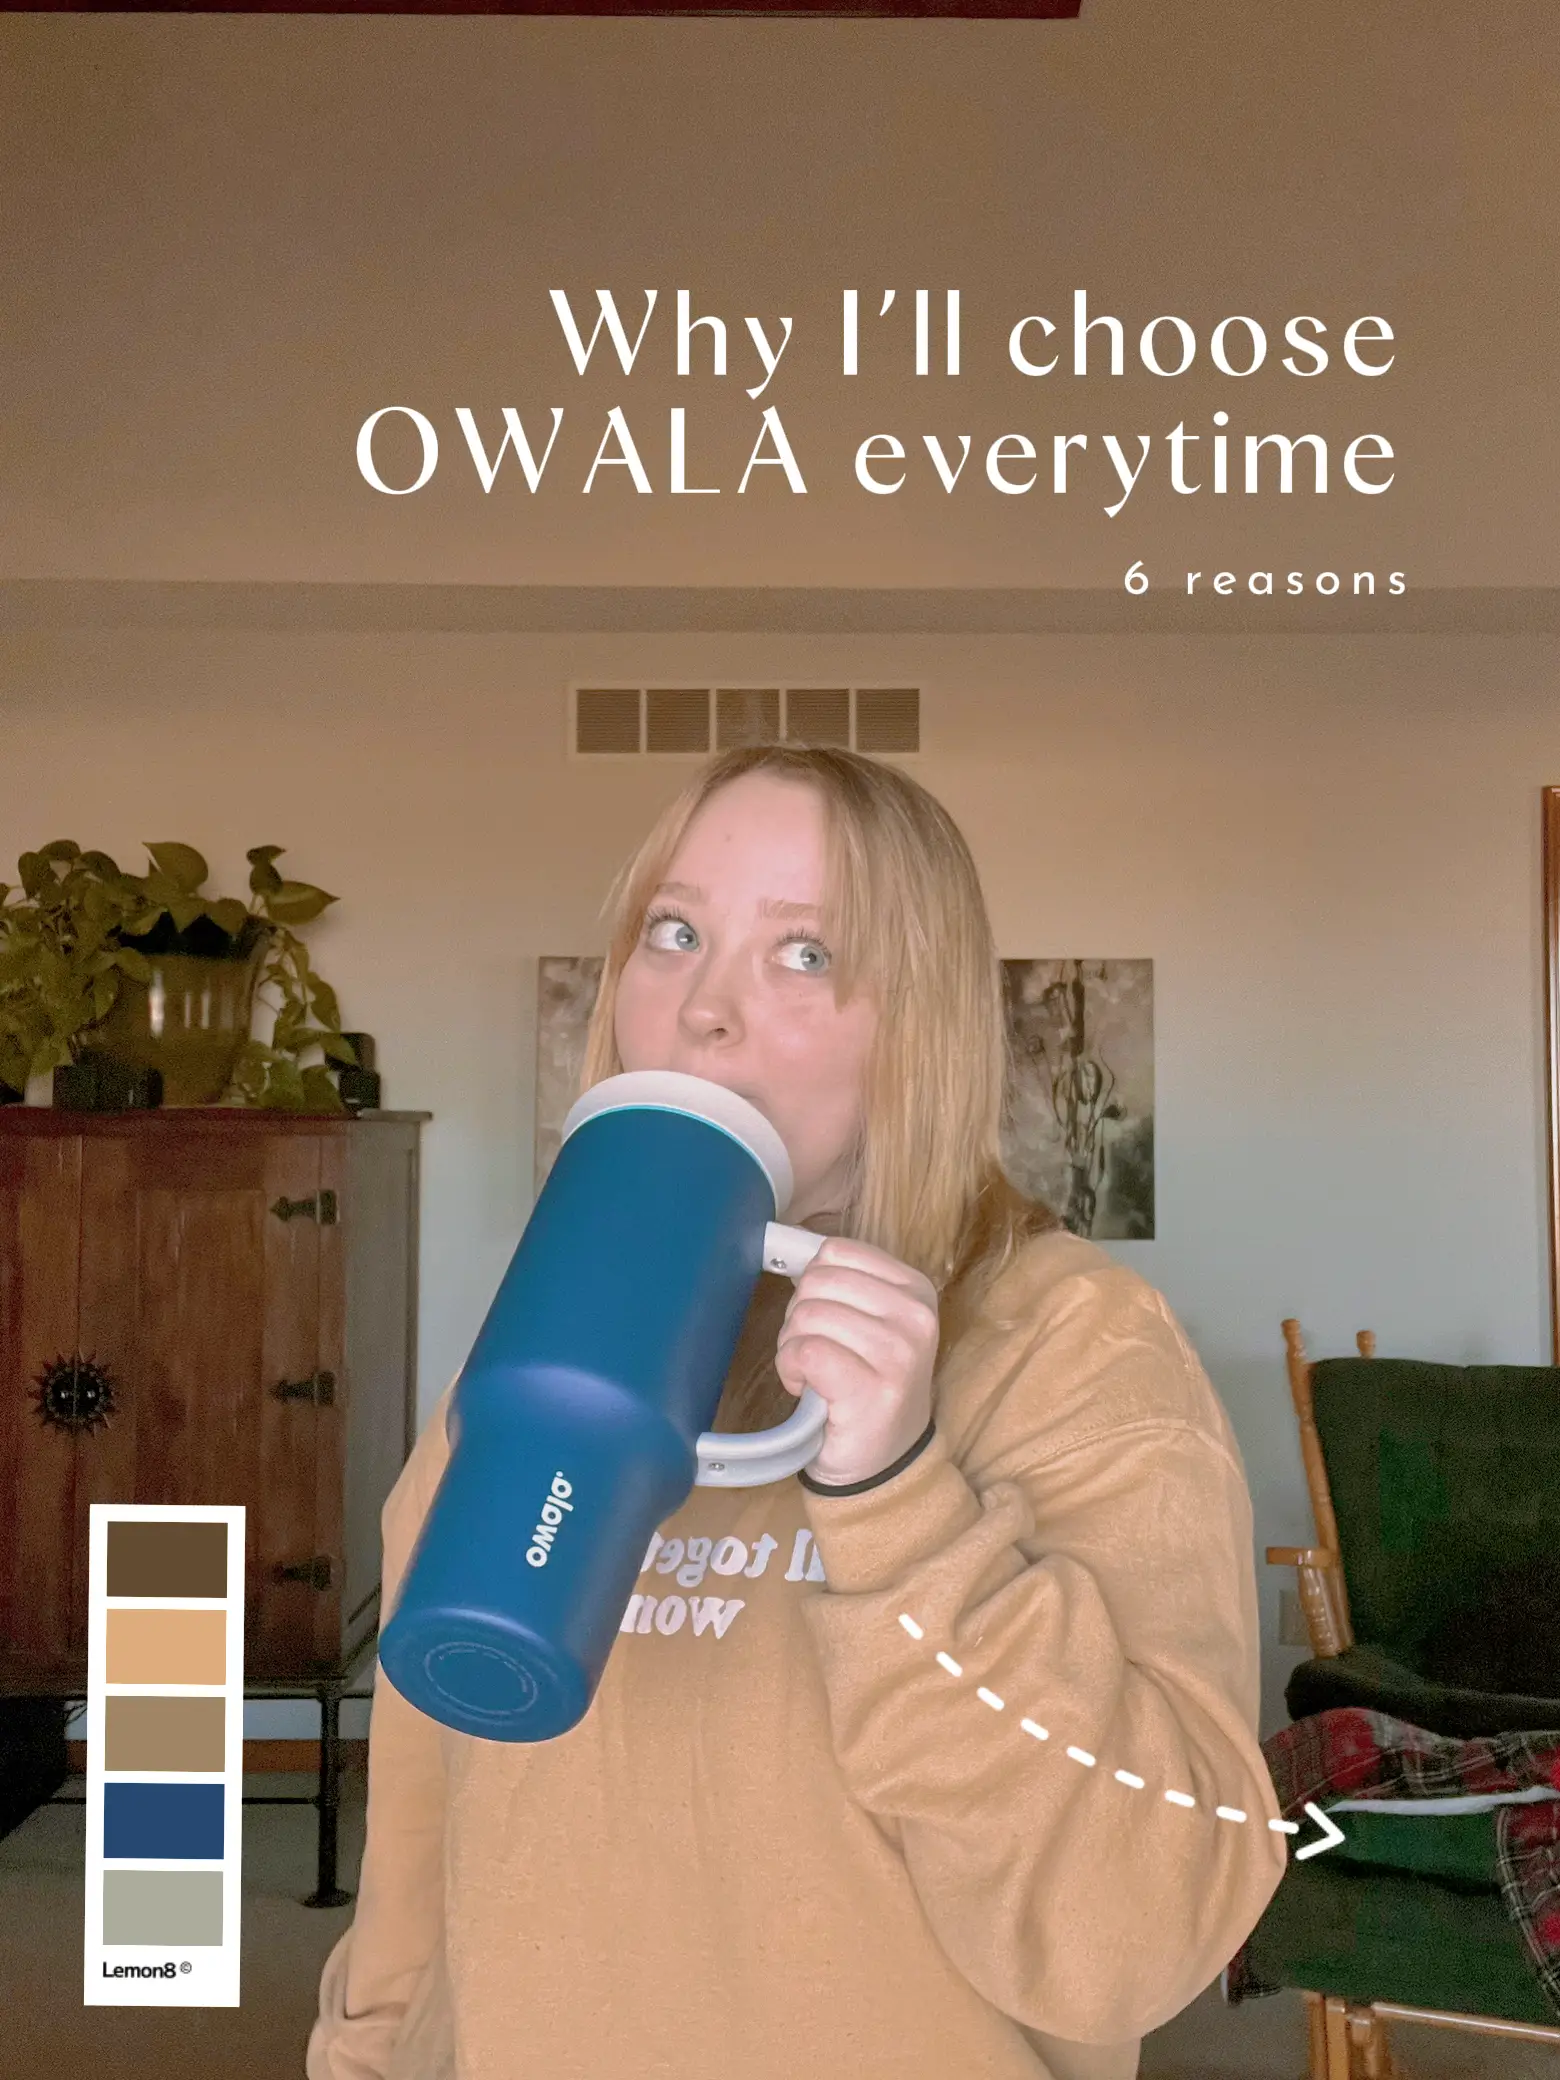 We Tried These Owala Water Tumblers And Our Lives Have Been Forever Changed  - DivaGalsDaily